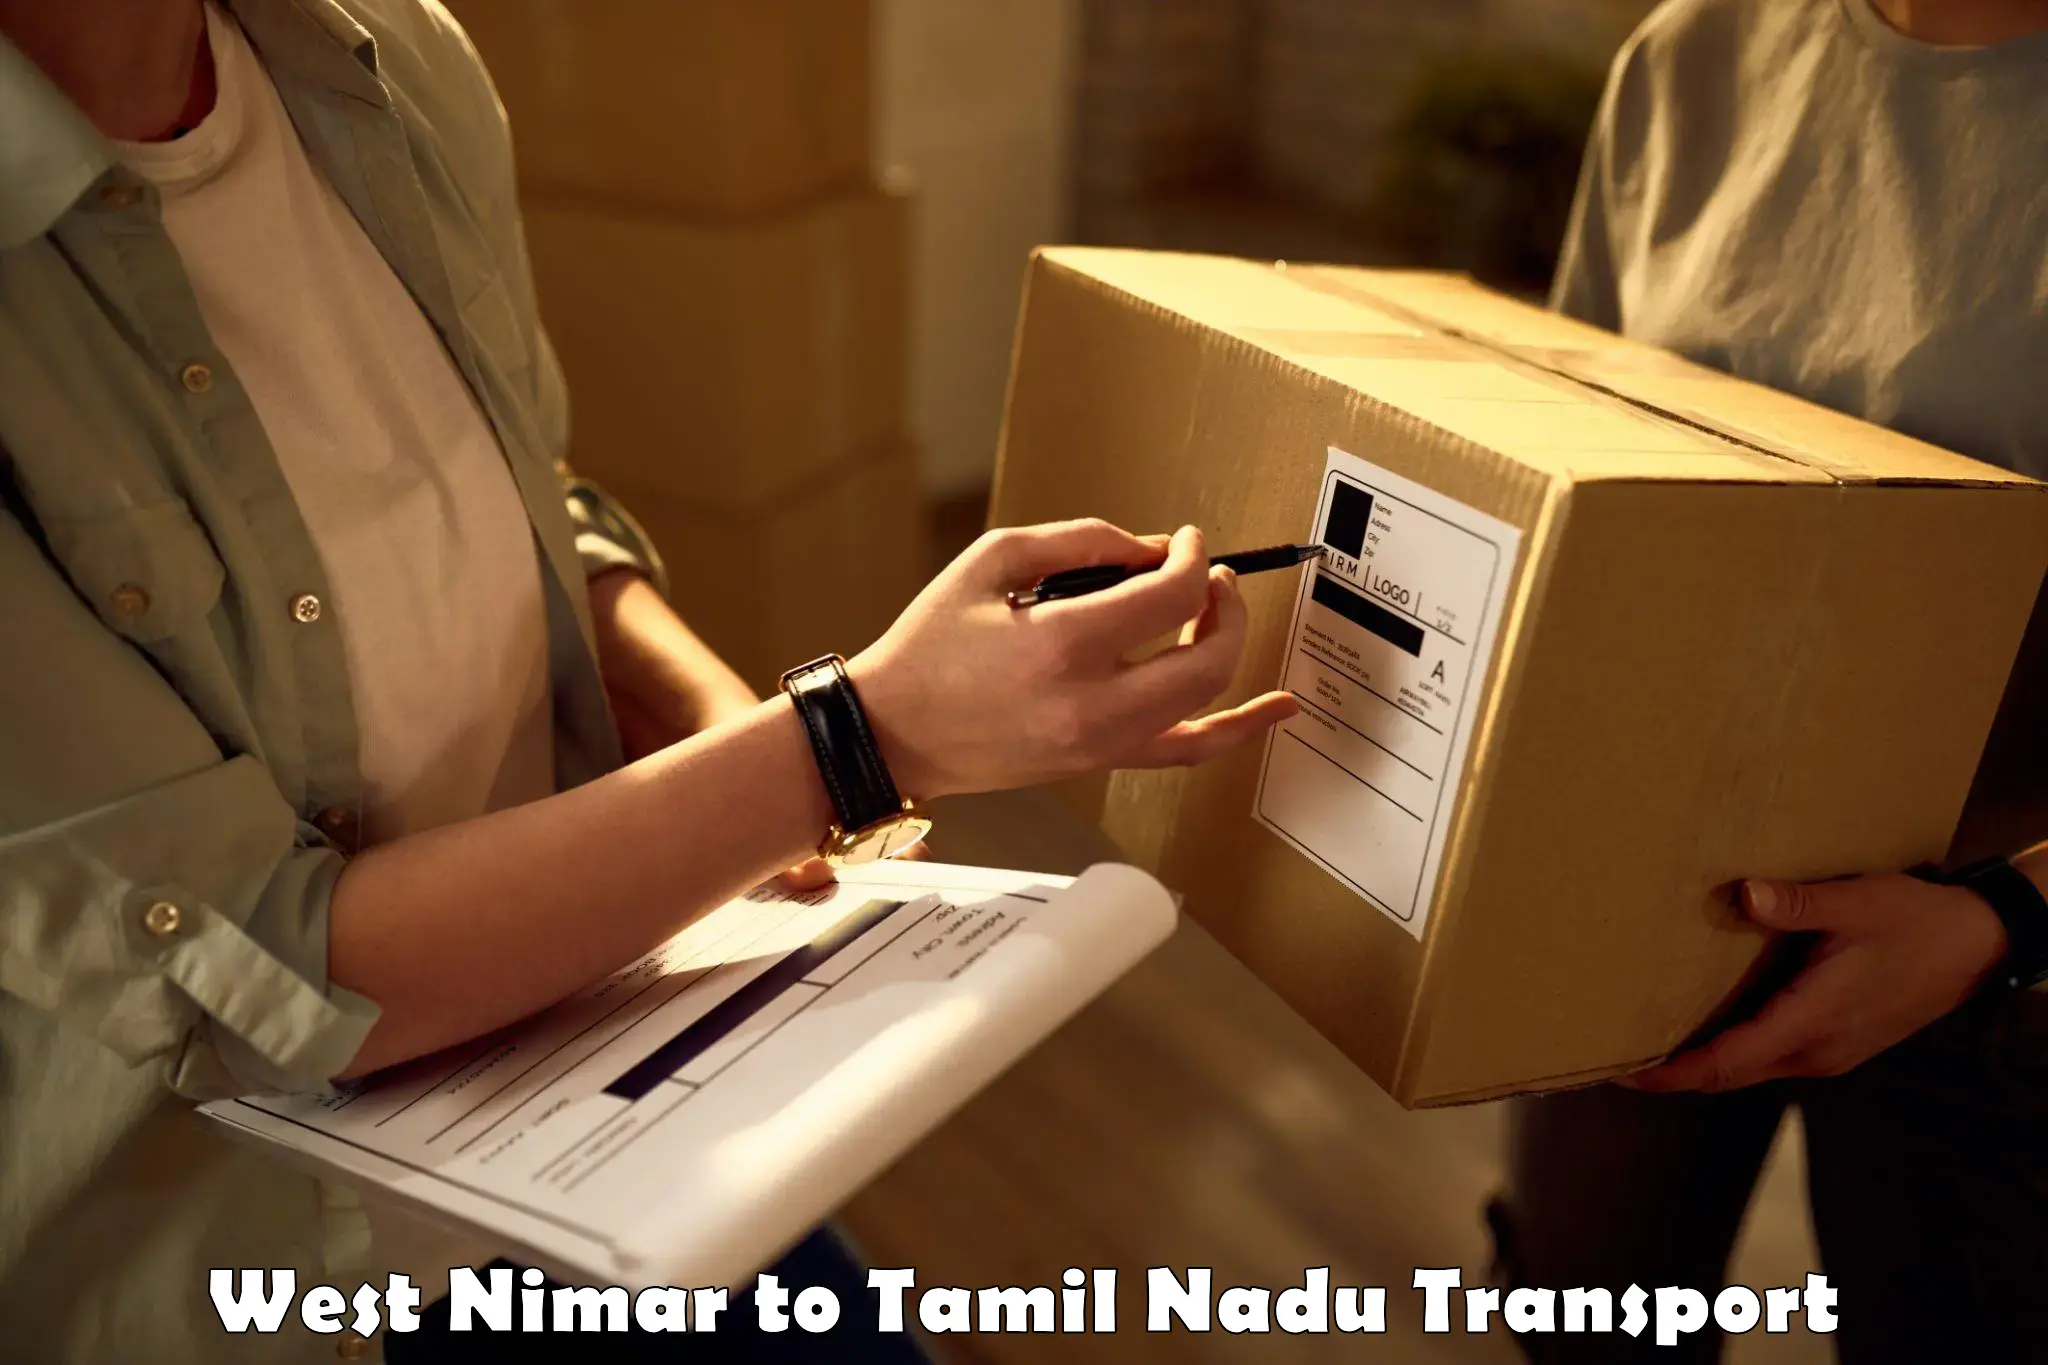 Truck transport companies in India West Nimar to Annur